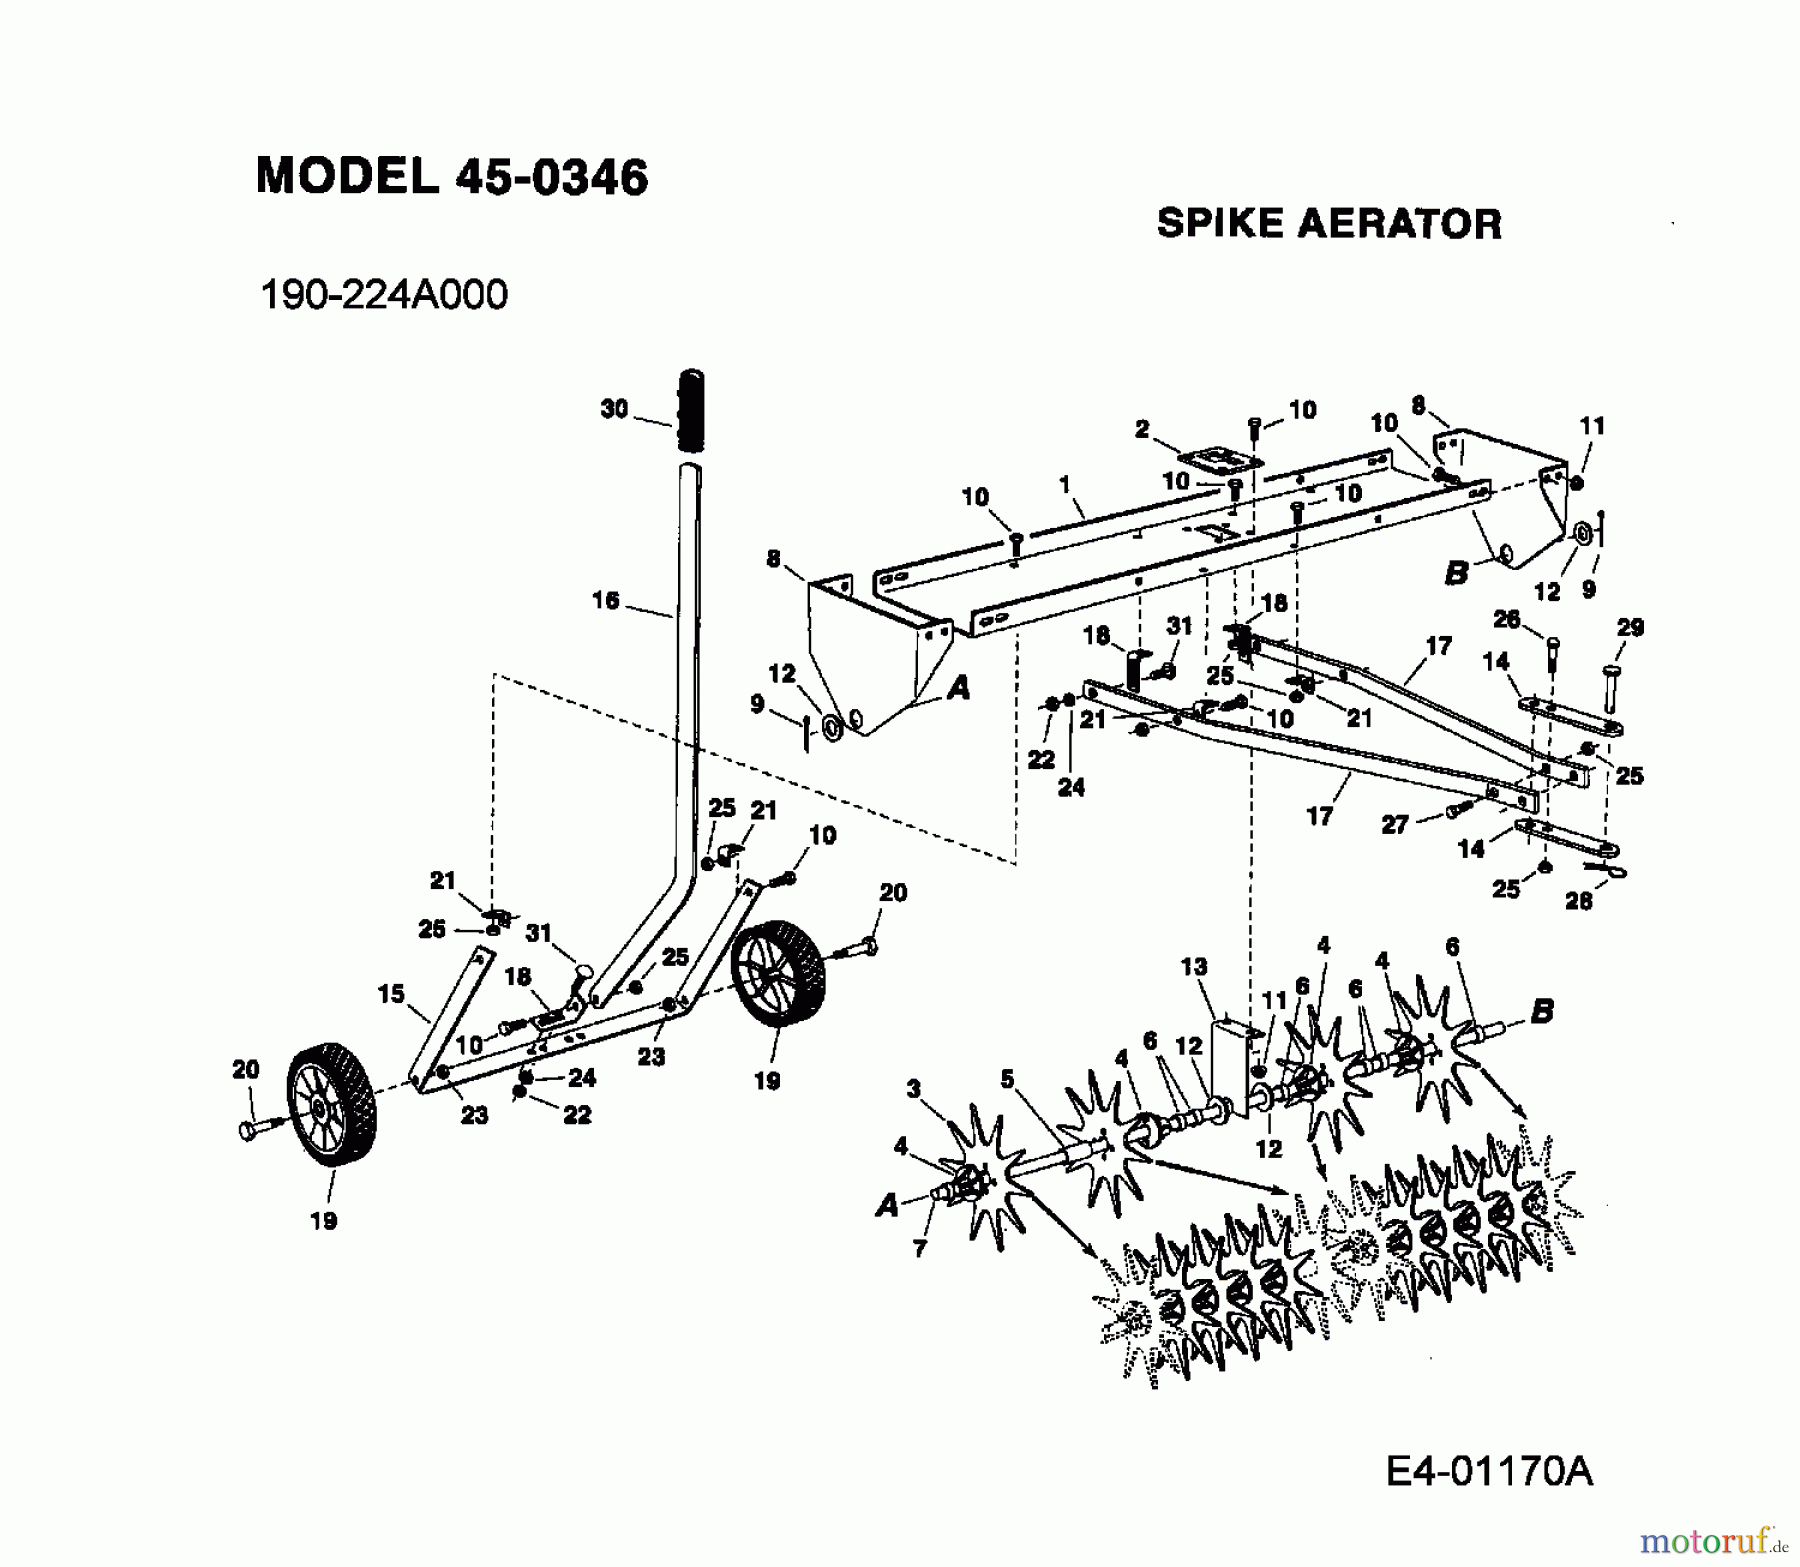  MTD Accessories Accessories garden and lawn tractors Groomer 45-0346  (190-224A000) 190-224A000  (2007) Basic machine